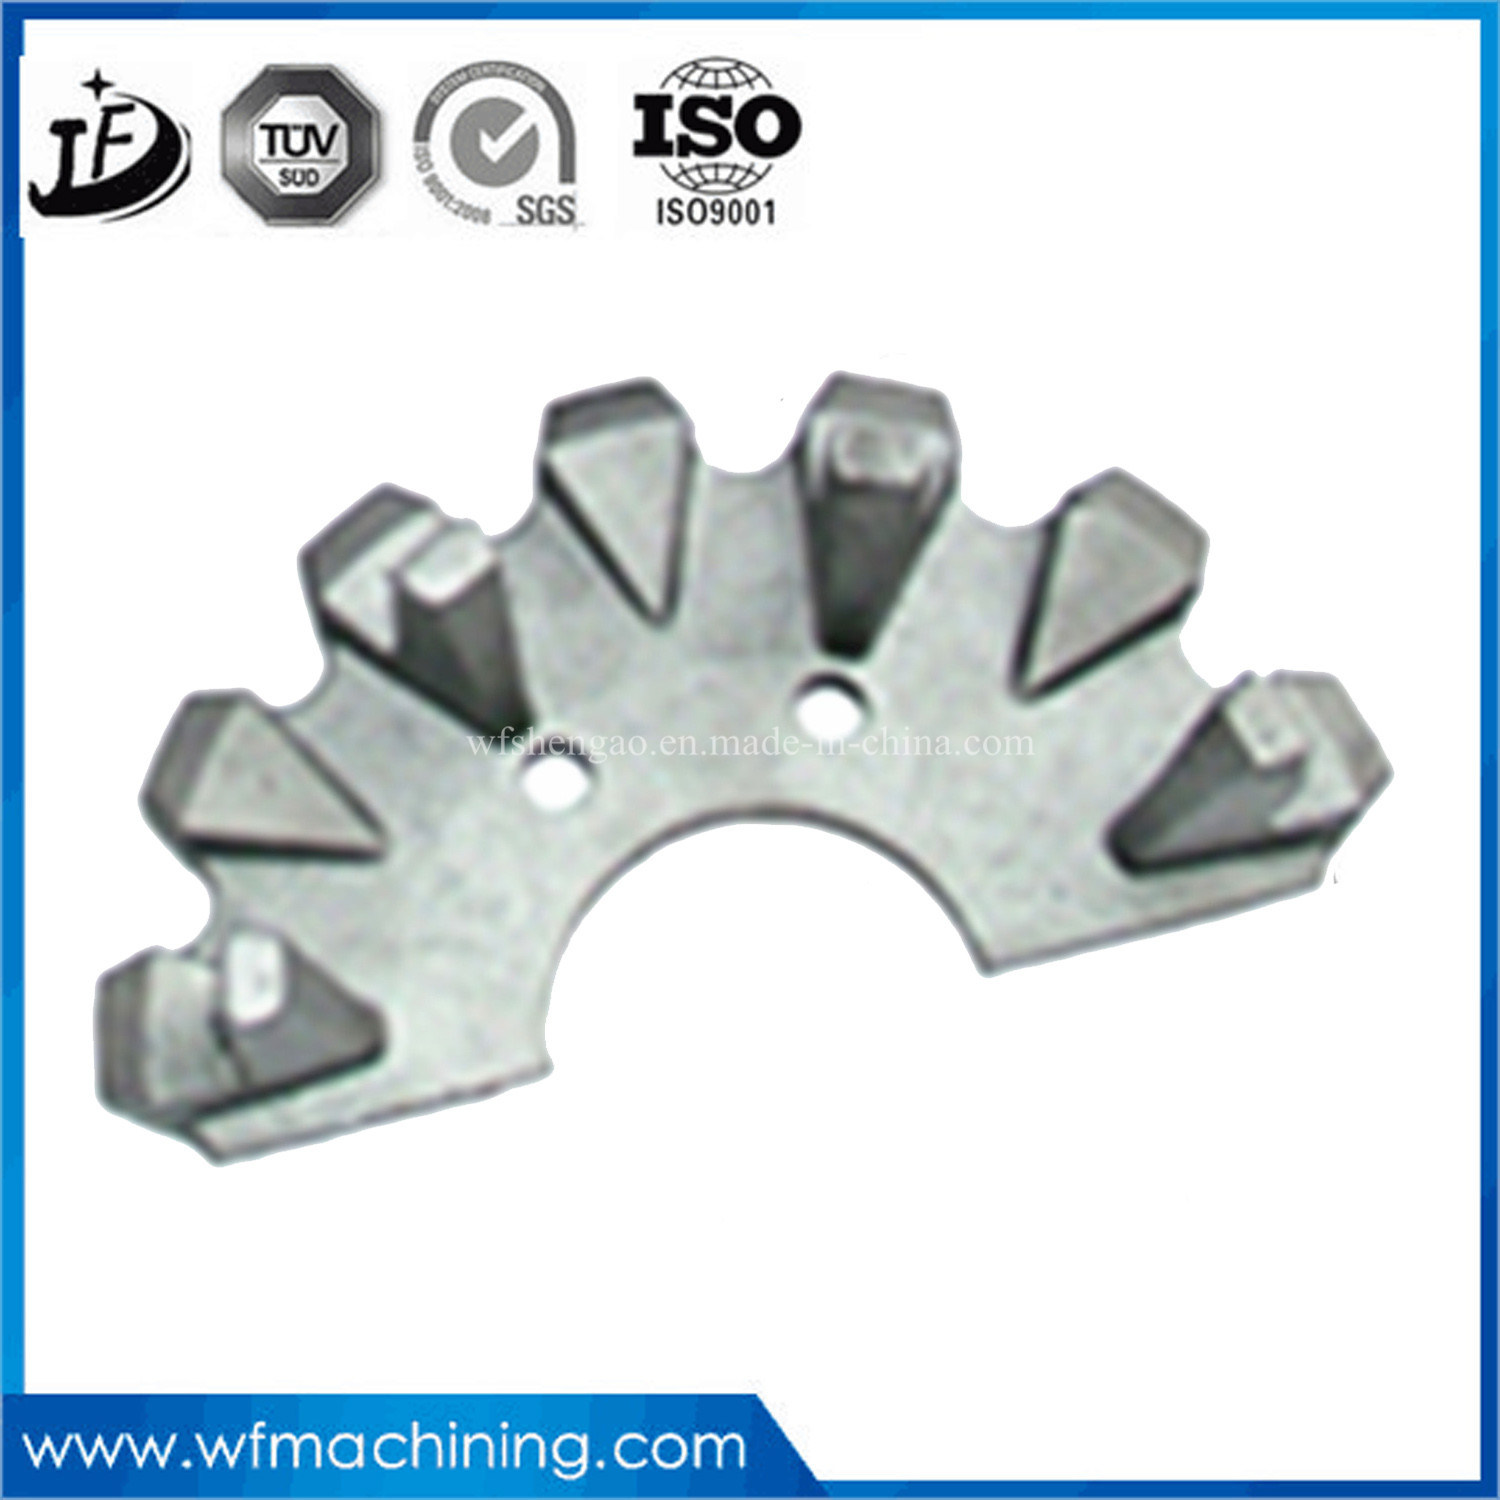 Precision Stainless Steel/Investment/Precision Casting for Mining Machinery Part